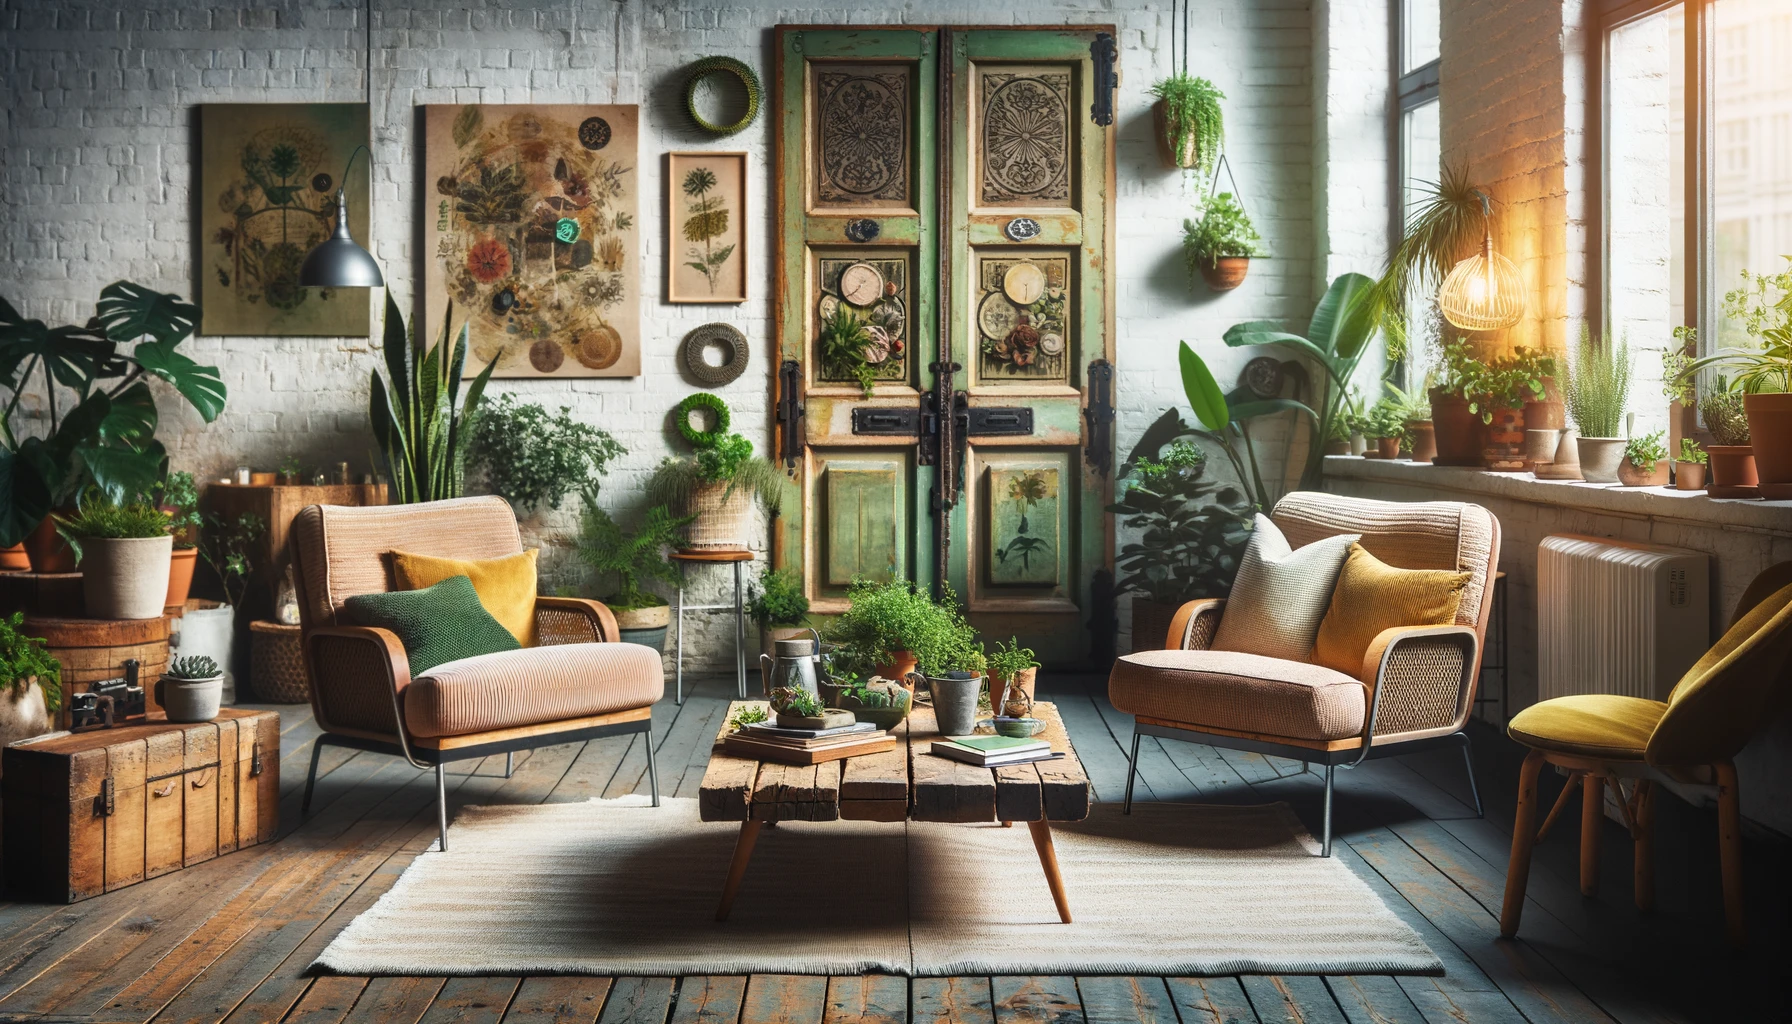 Cozy vintage living room with indoor plants and decor.